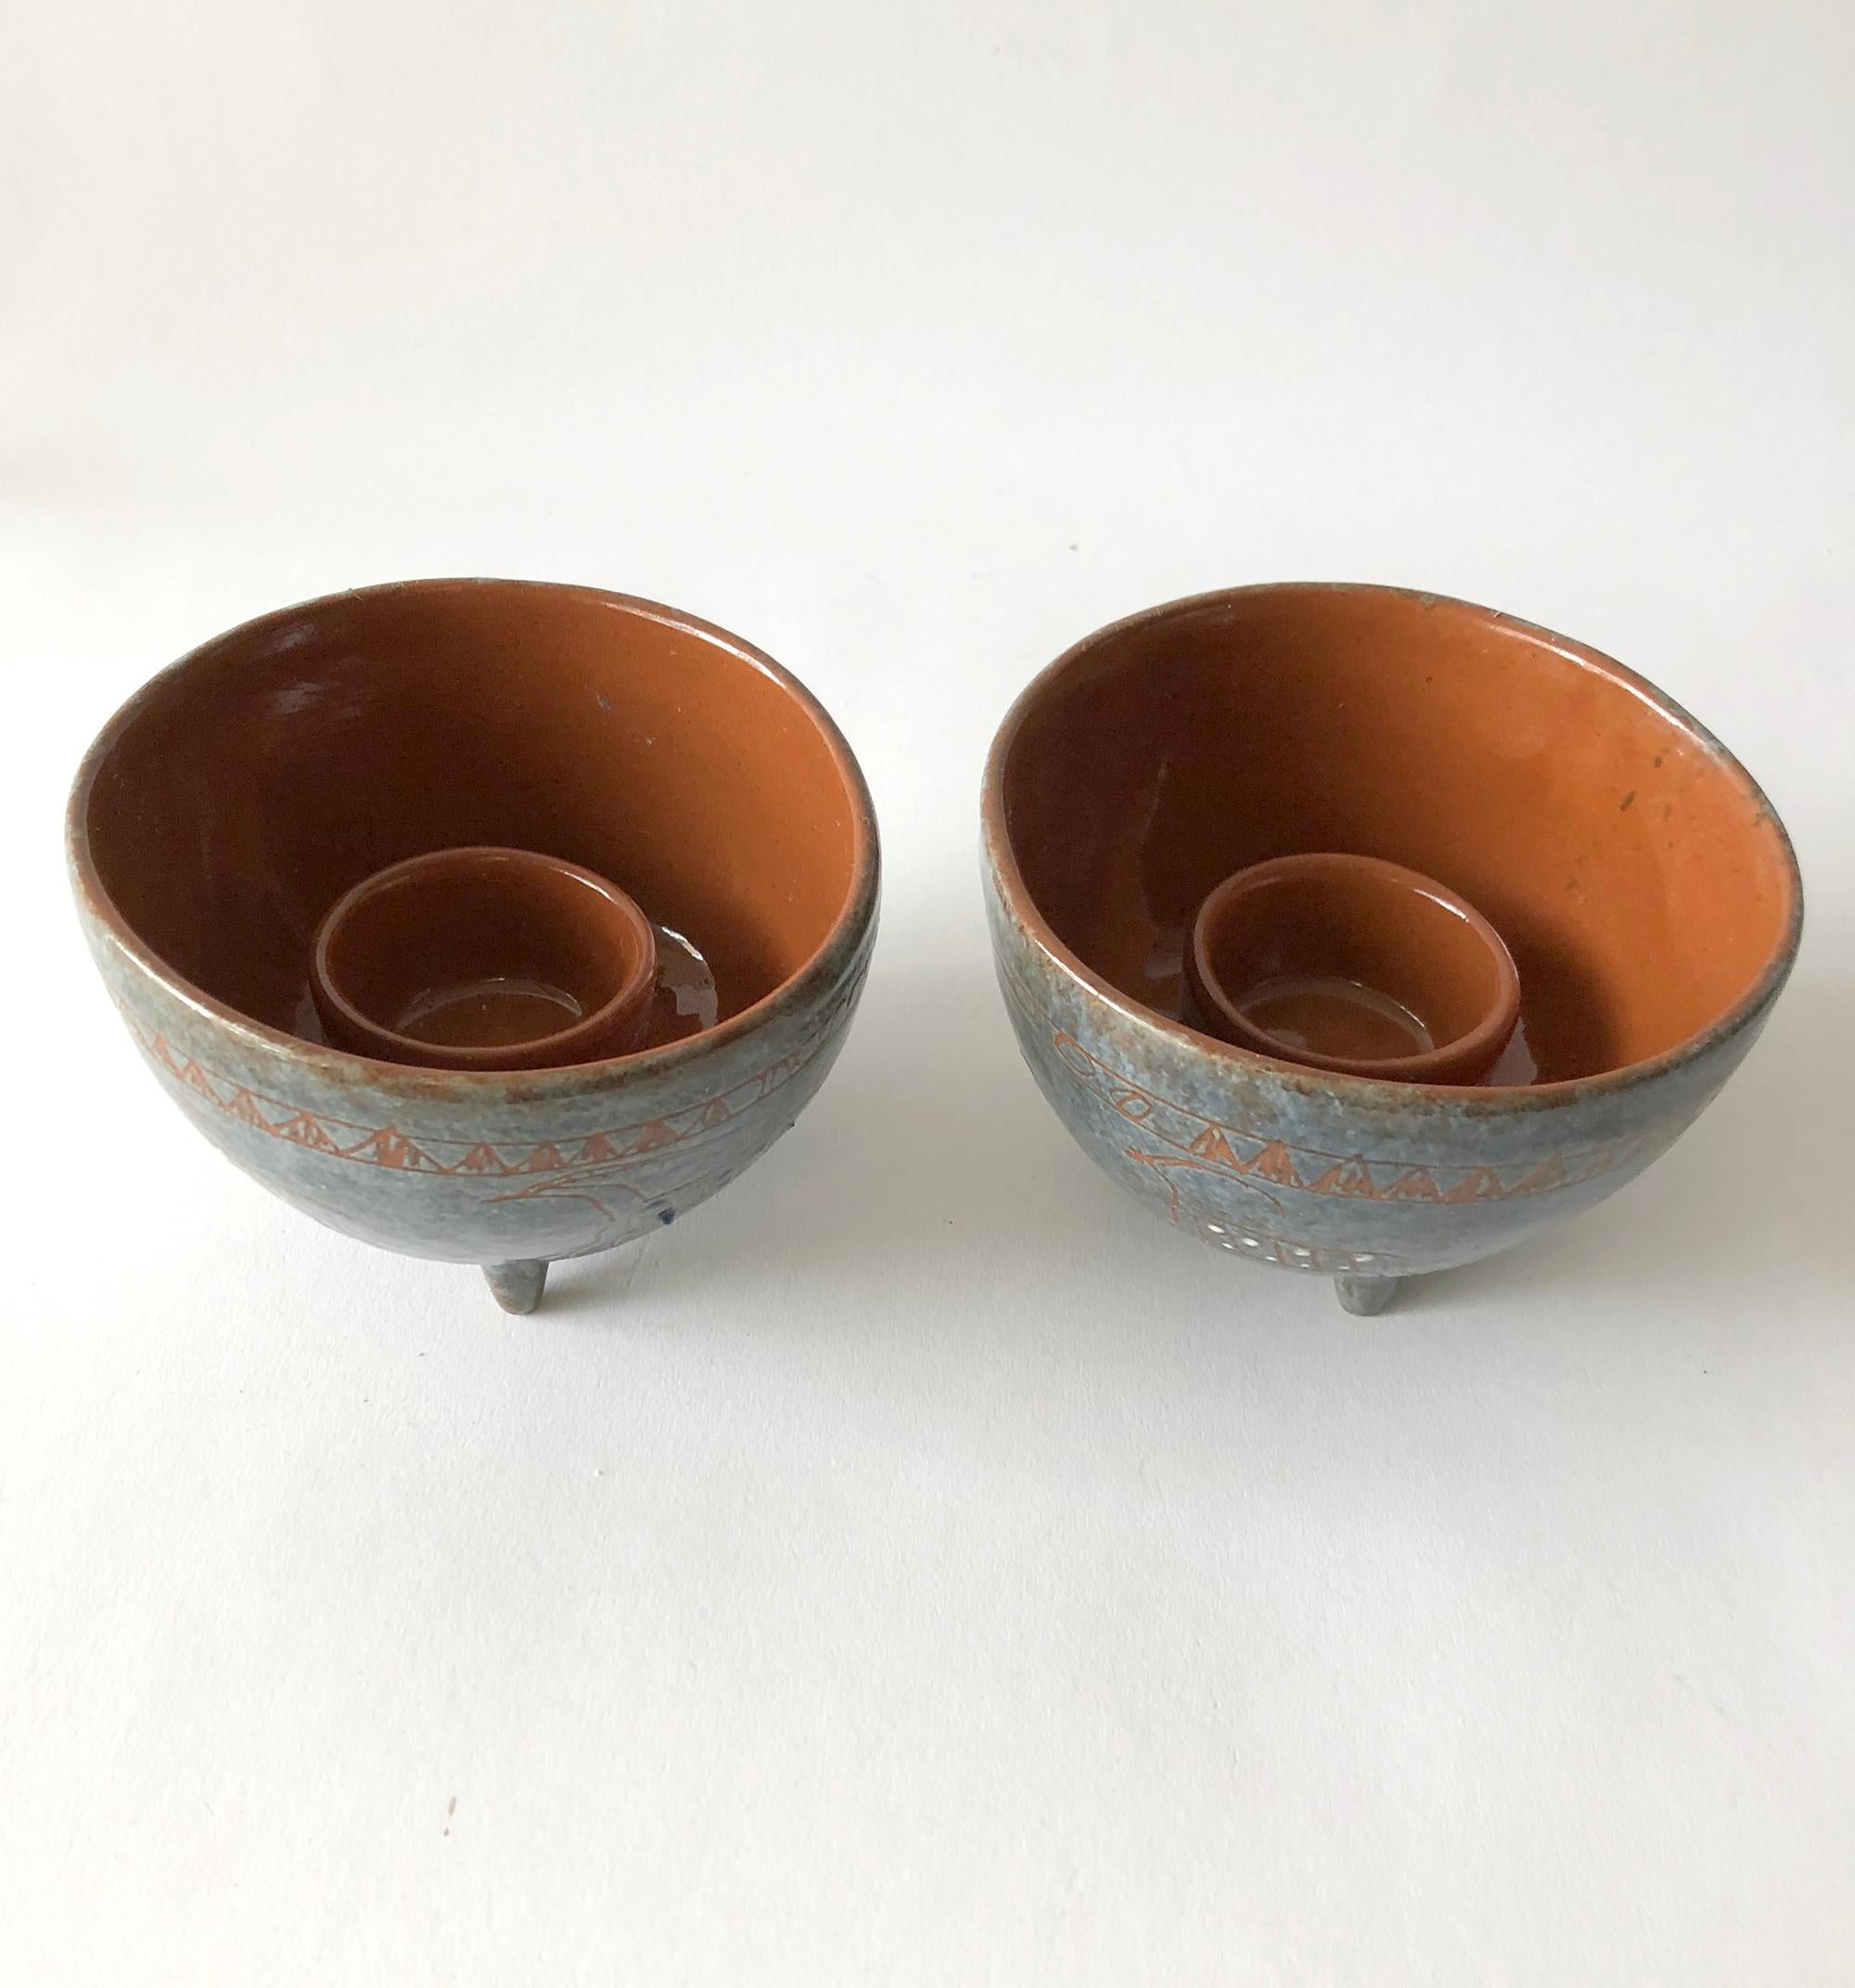 Pair of candleholders with drawn hieroglyphic design created by LaGardo Tackett. Candleholders measure 3 1/4